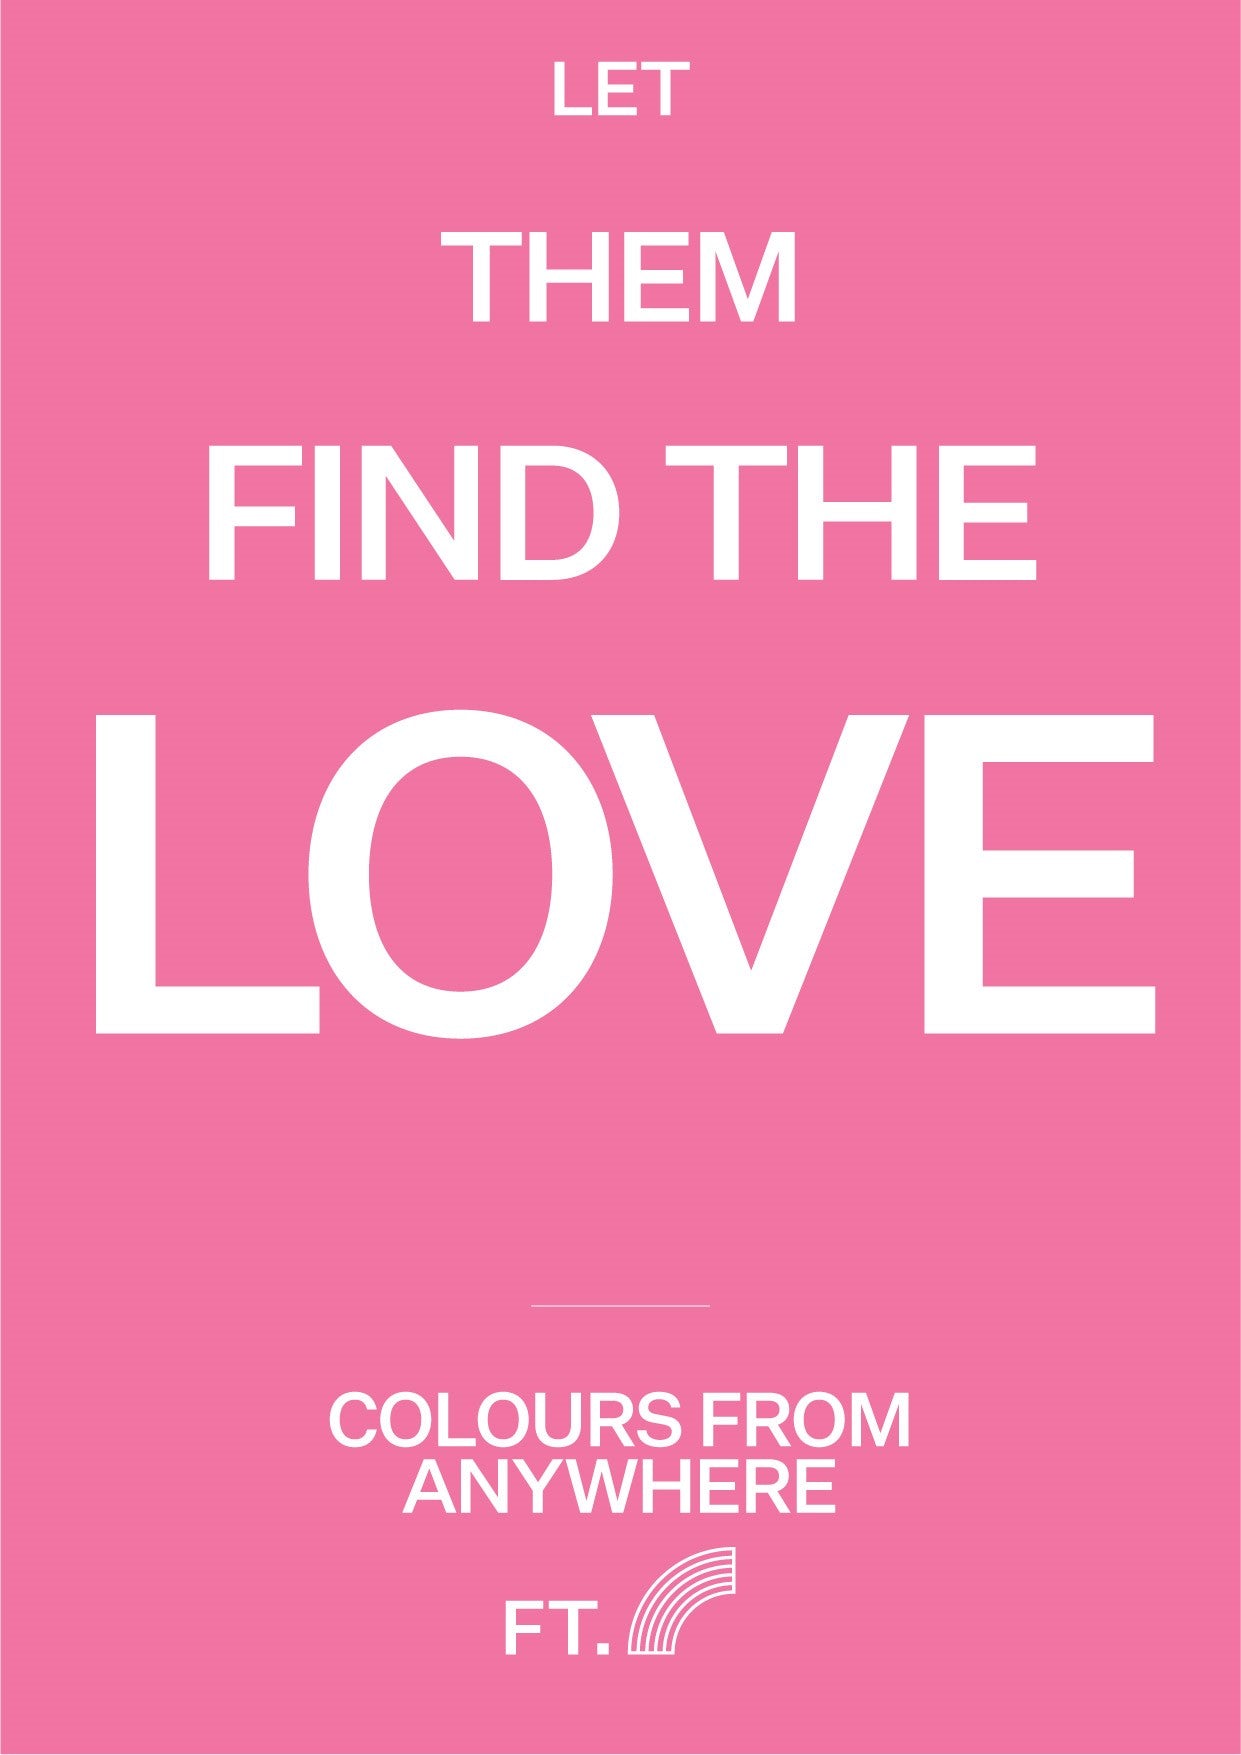 let them find the love poster